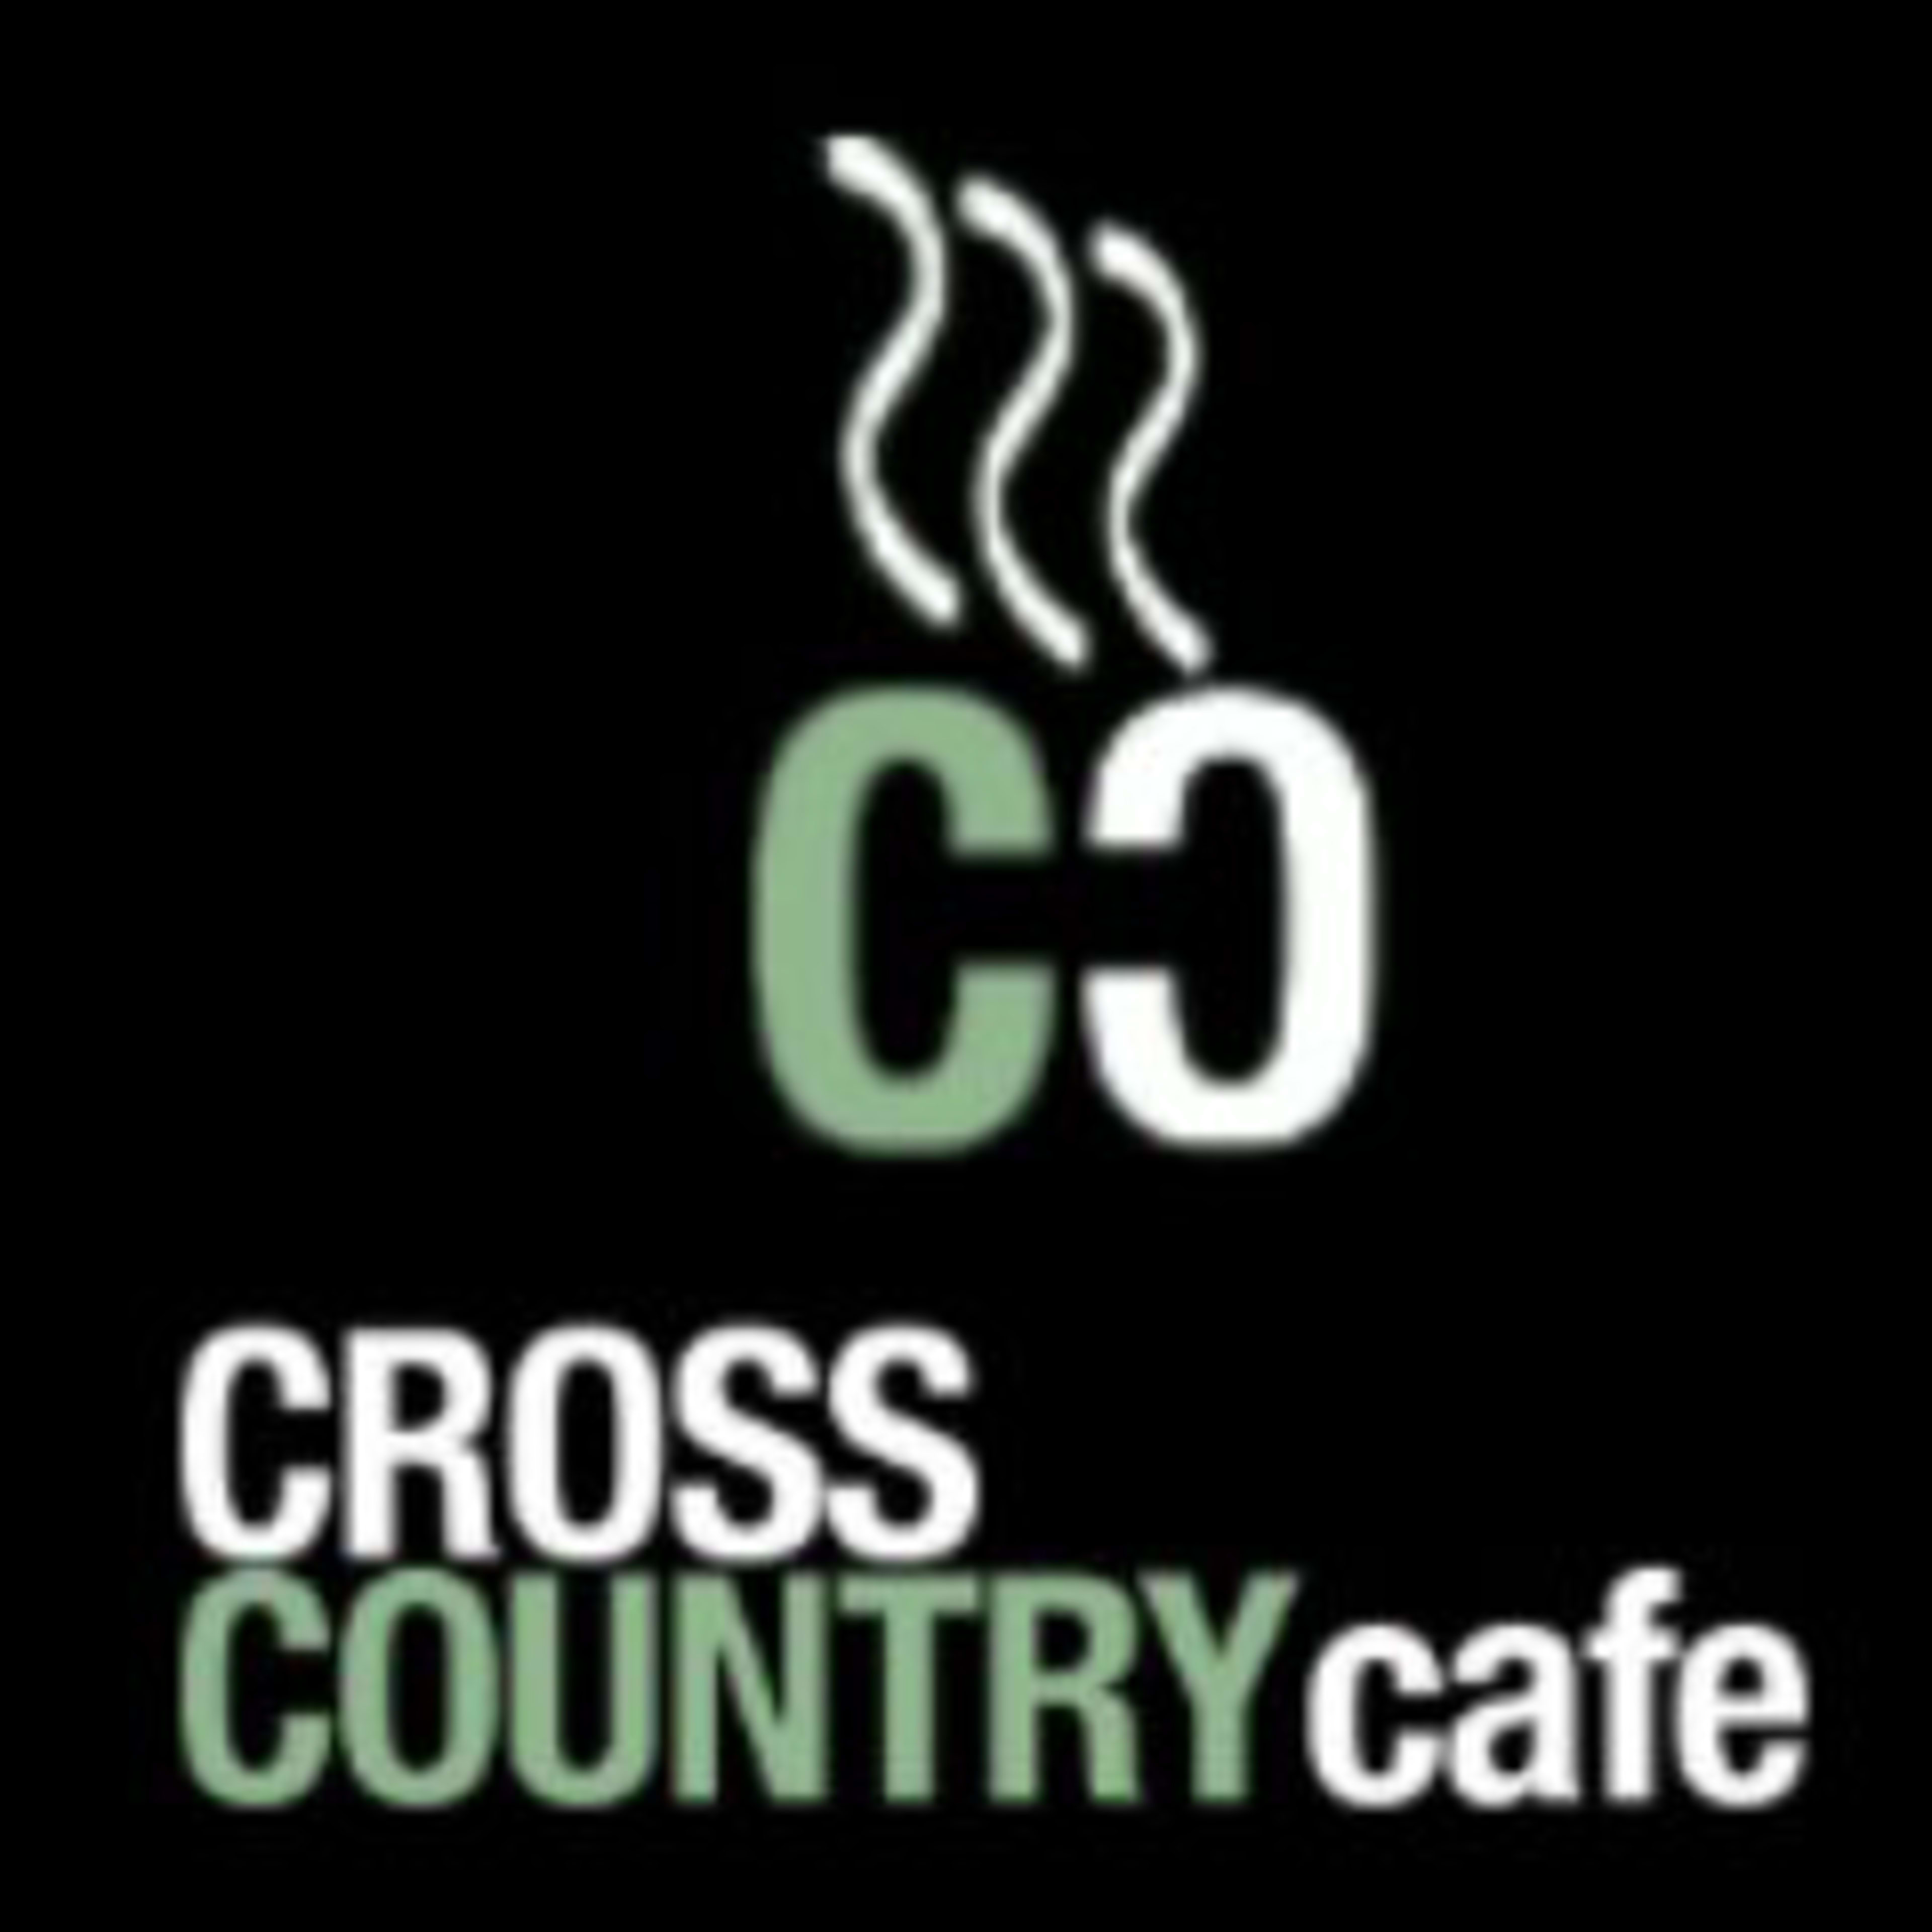 Cross Country CafeCode